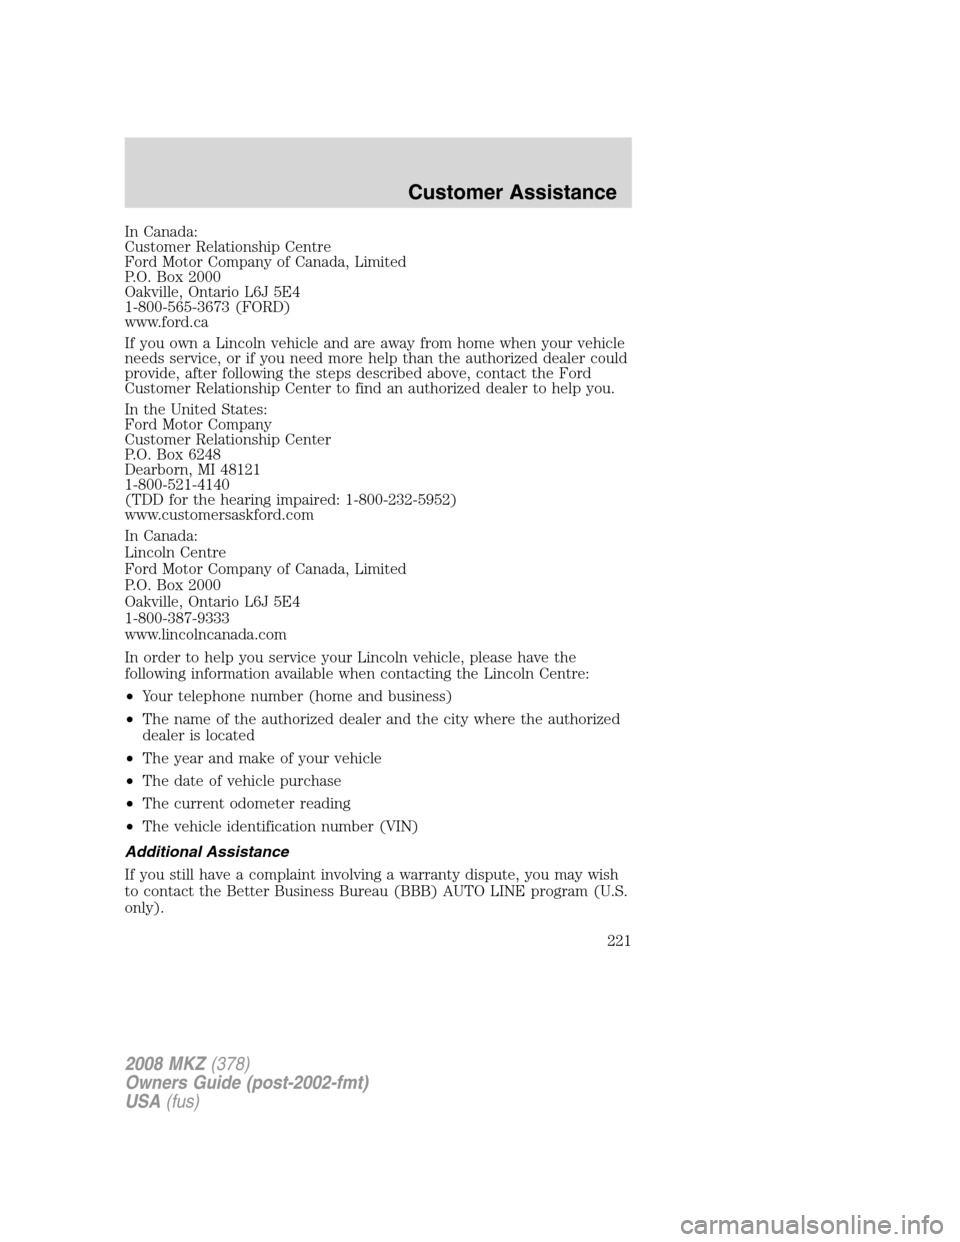 LINCOLN MKZ 2008  Owners Manual In Canada:
Customer Relationship Centre
Ford Motor Company of Canada, Limited
P.O. Box 2000
Oakville, Ontario L6J 5E4
1-800-565-3673 (FORD)
www.ford.ca
If you own a Lincoln vehicle and are away from h